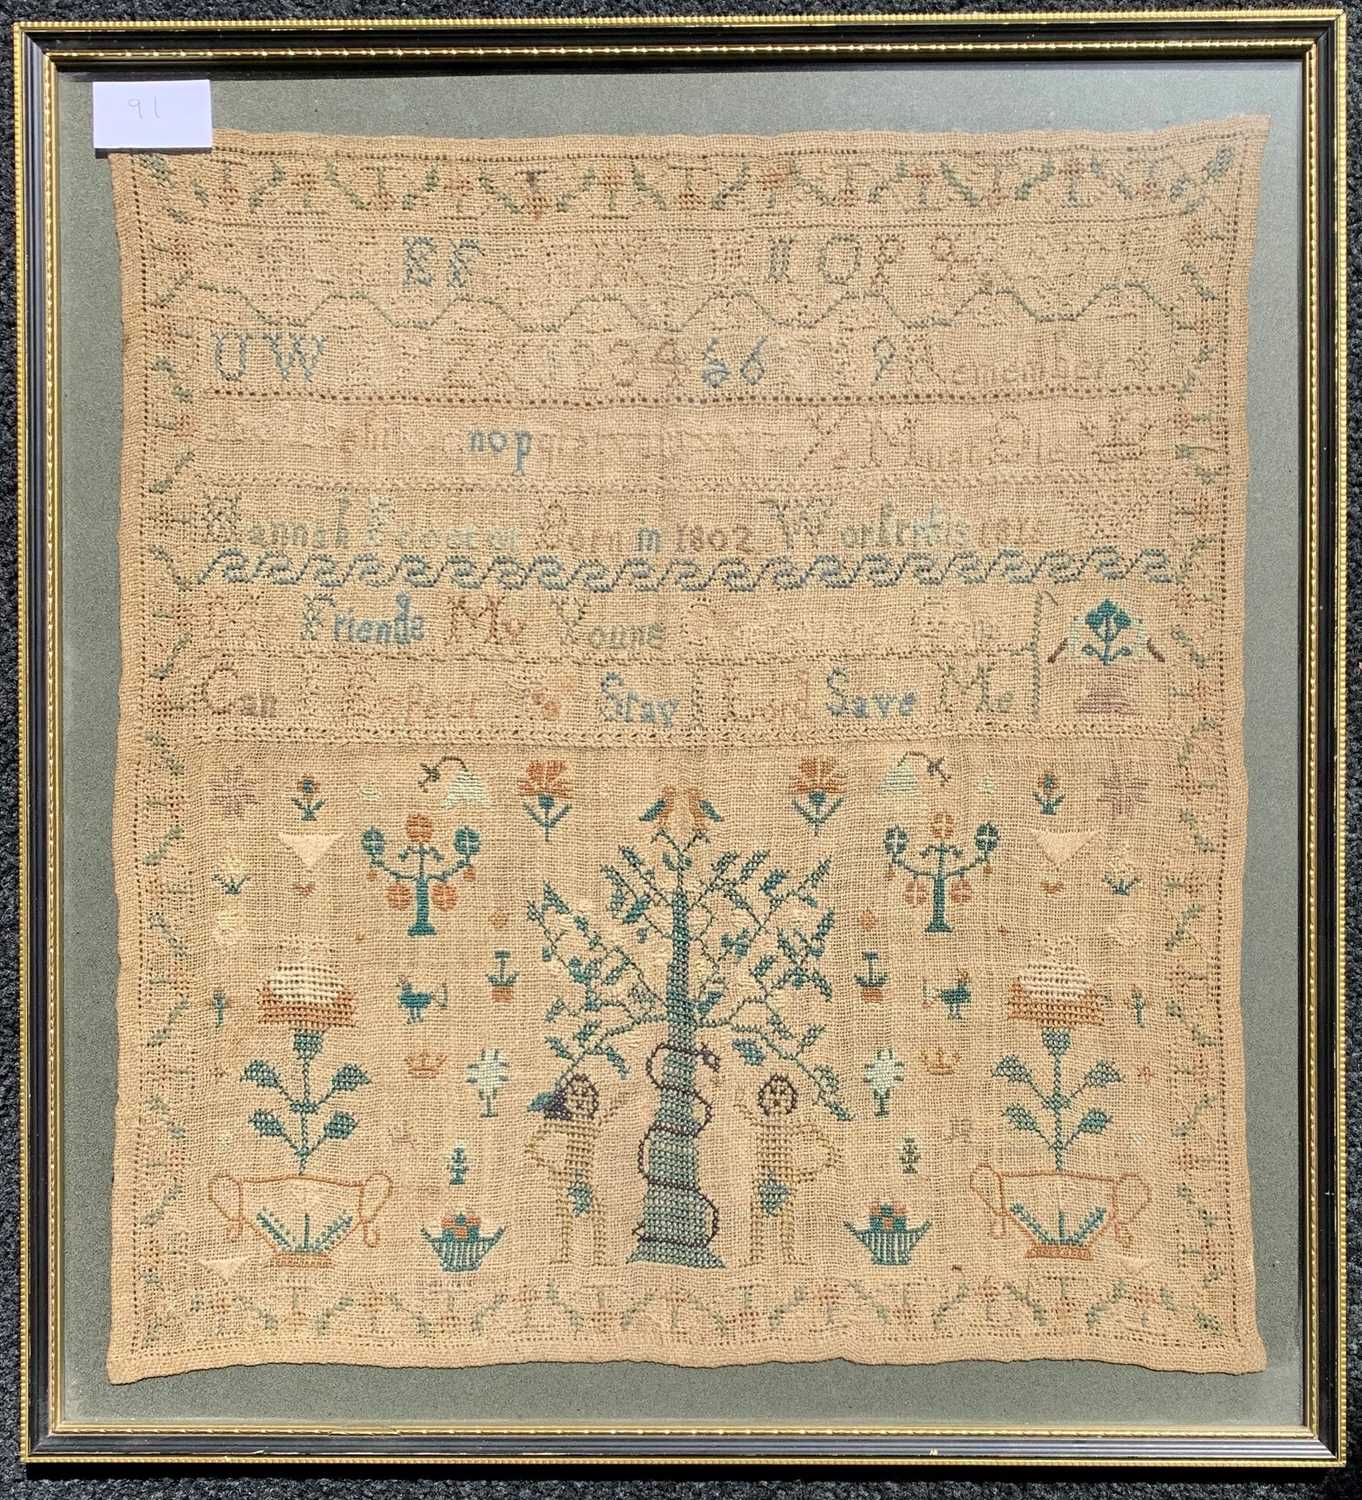 19th century needlework sampler, 'Hannah Proctor. Born in 1802 worked this in 1815. My Friends My